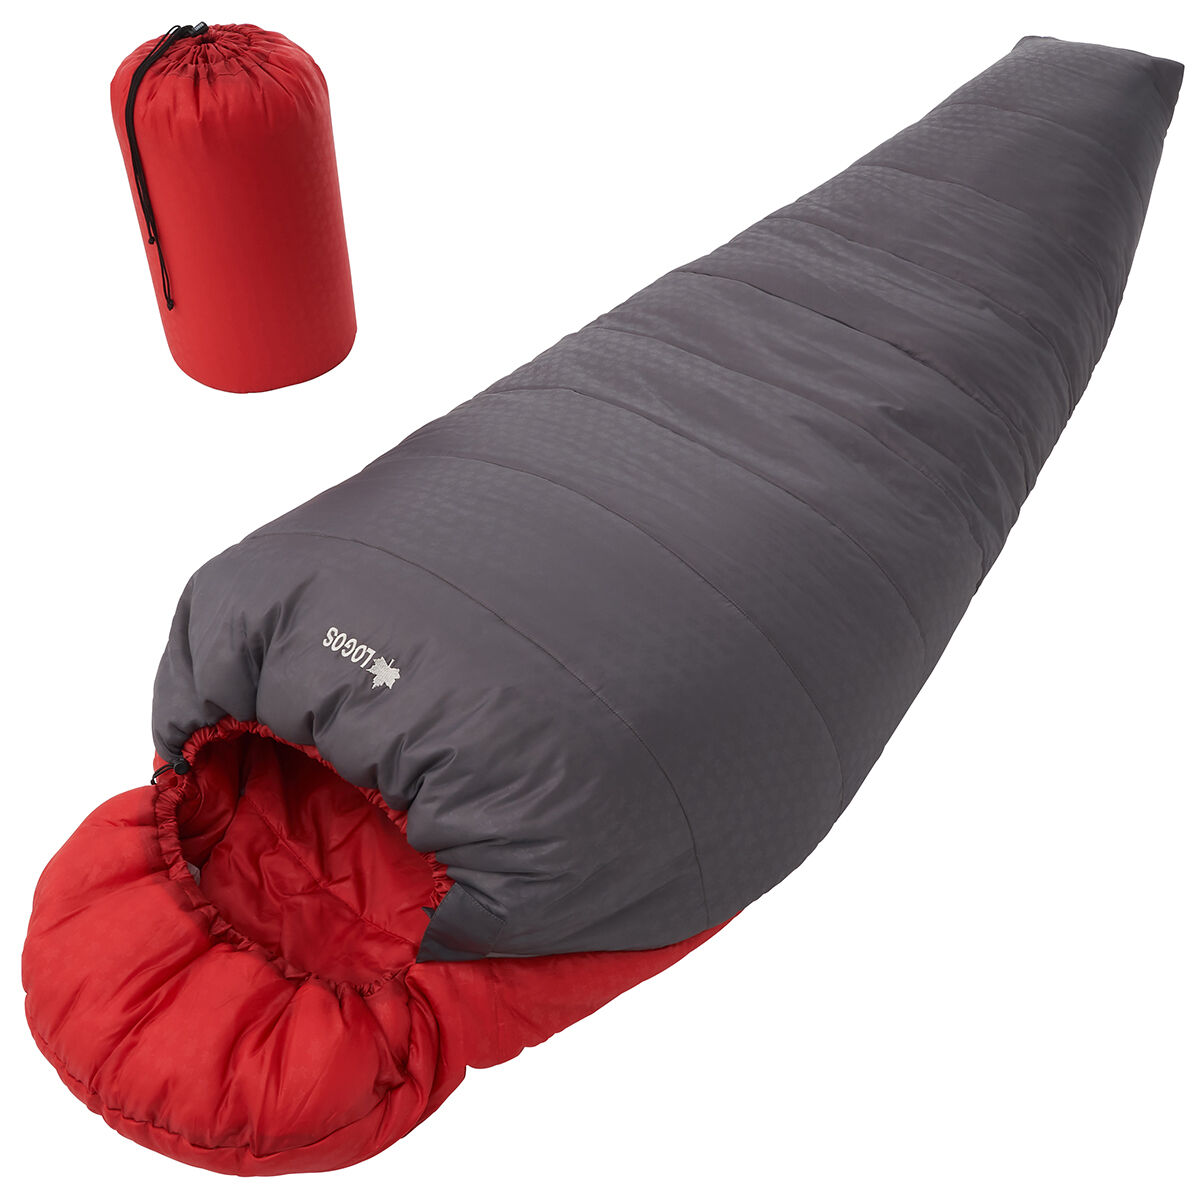 Shop Shop All Sleeping Bags & Beds | LOGOS Official Global Online 